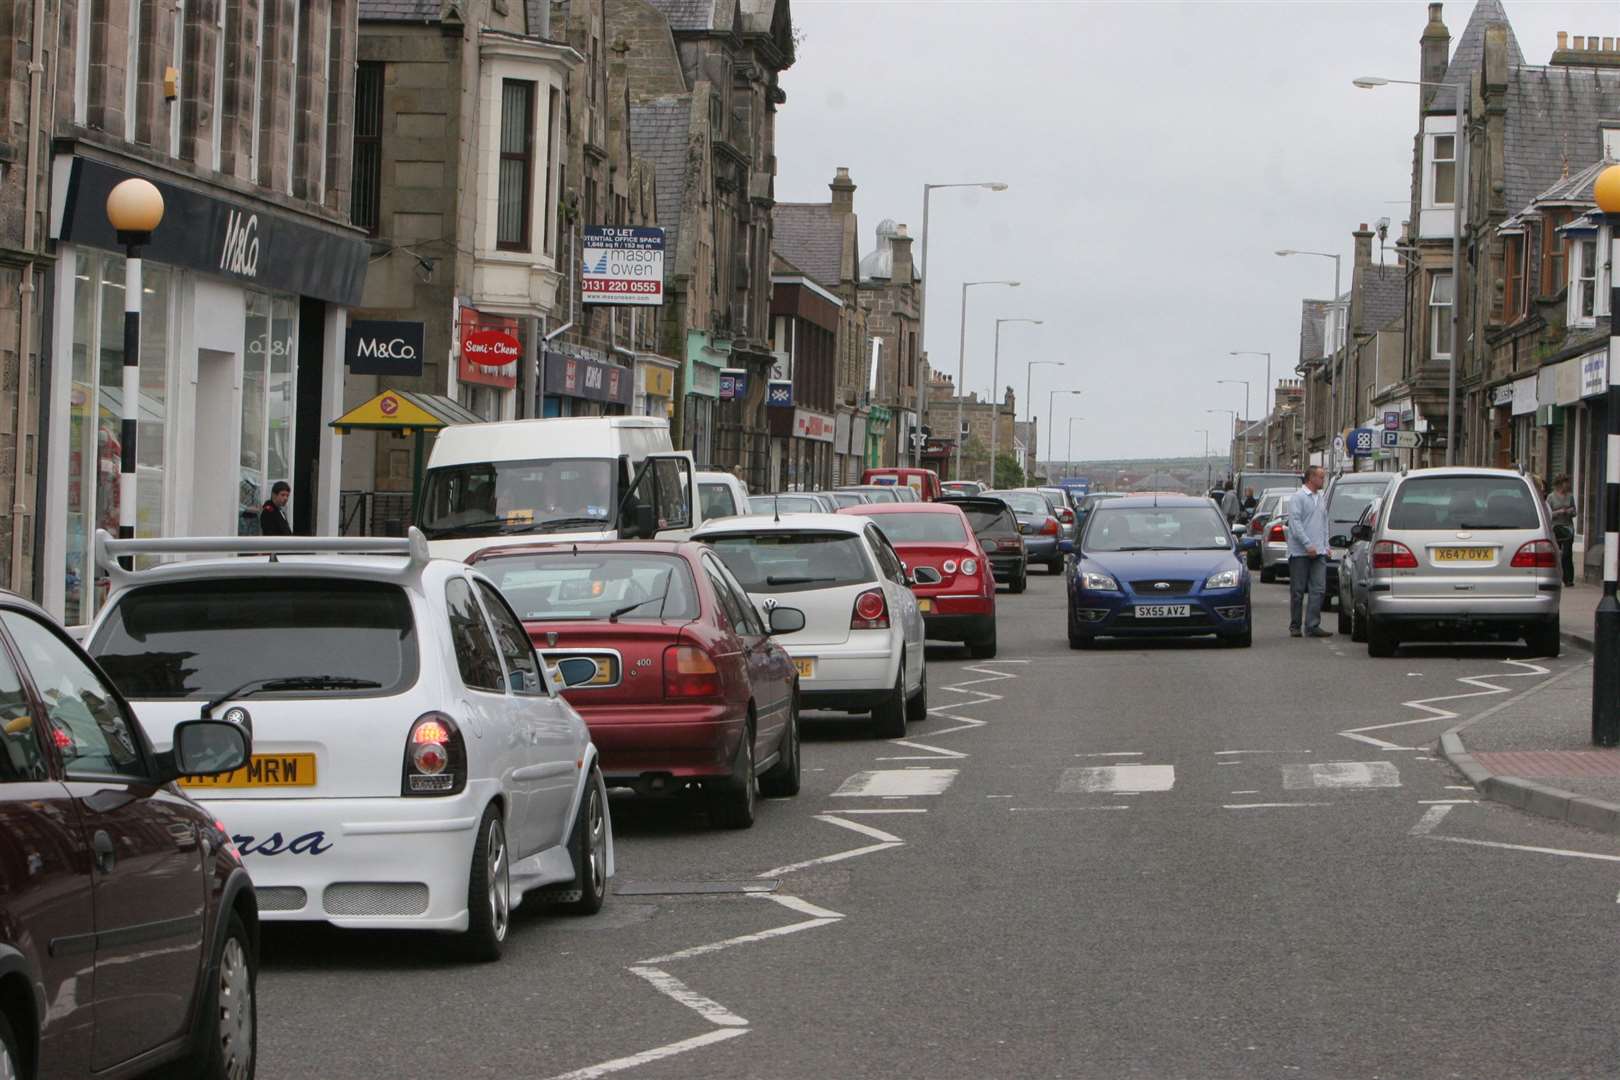 A development trust could help generate income for Buckie along with other benefits.